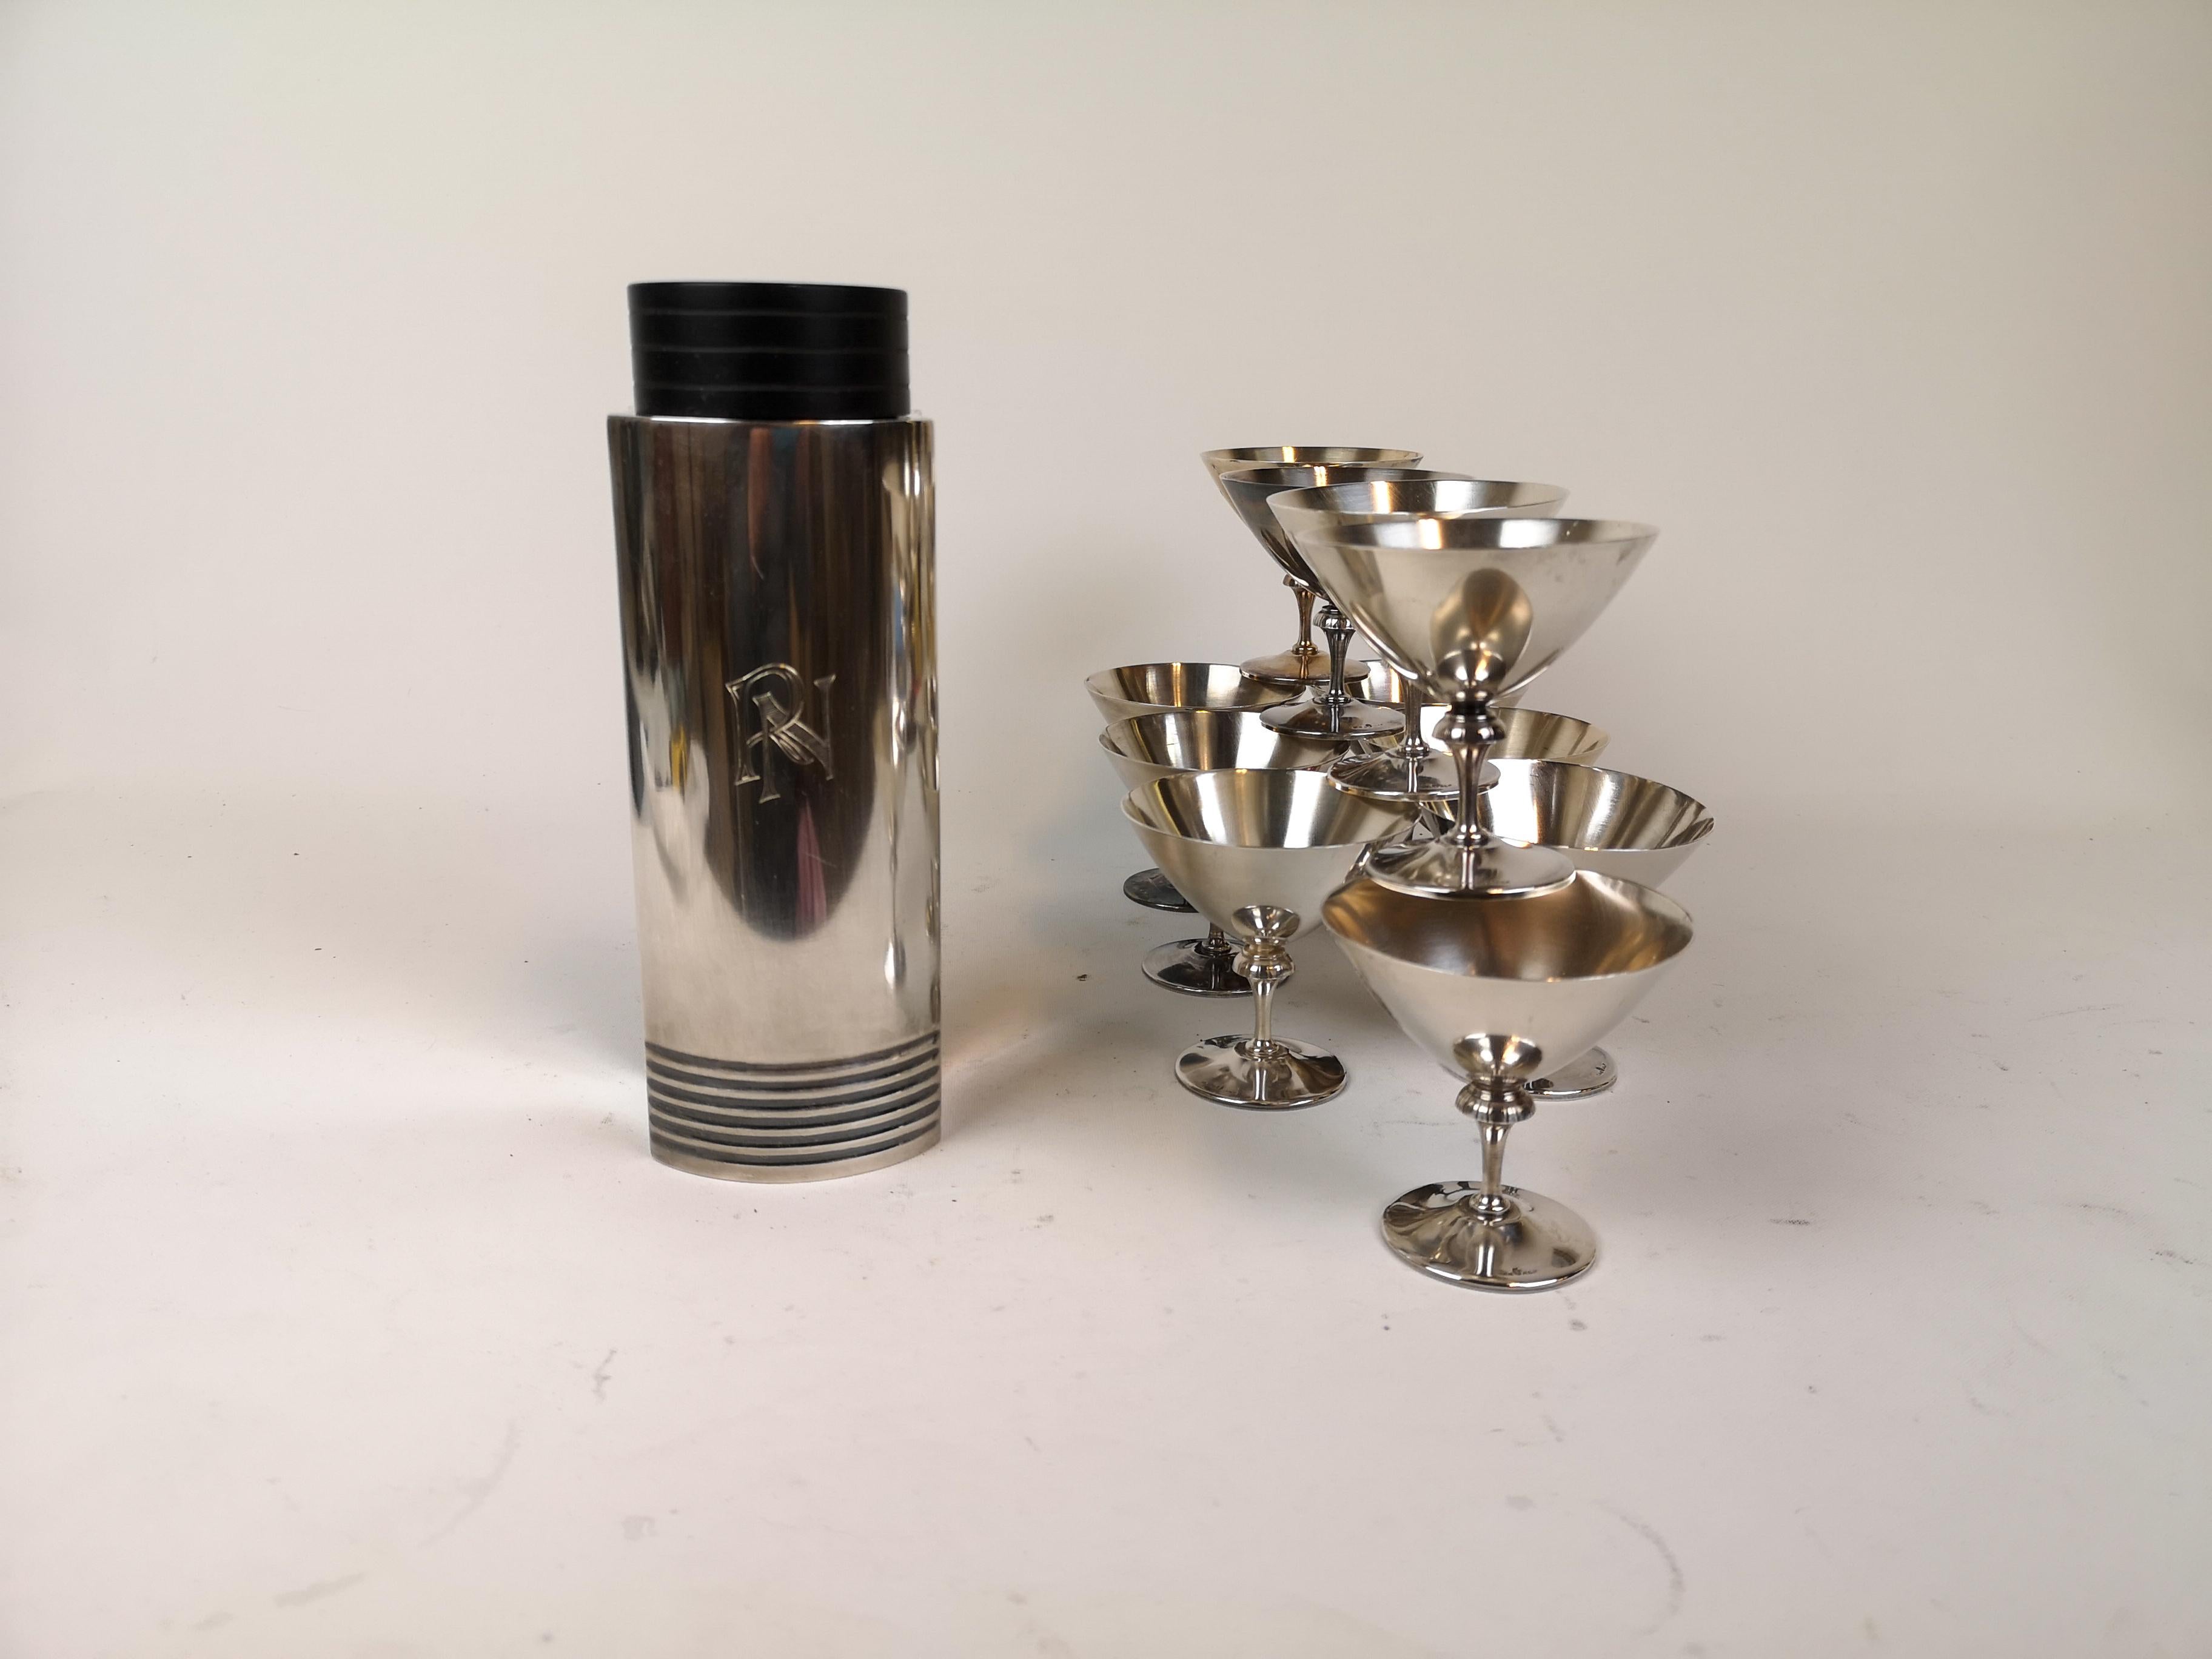 Wonderful, silver-plated Art Deco cocktail shaker and twelve martini glasses. Designed by Folke Arström in Sweden 1936 and produced for GAB. Each piece stamped. The shaker with the engraves RN. Polished or not these items are a great edition to any